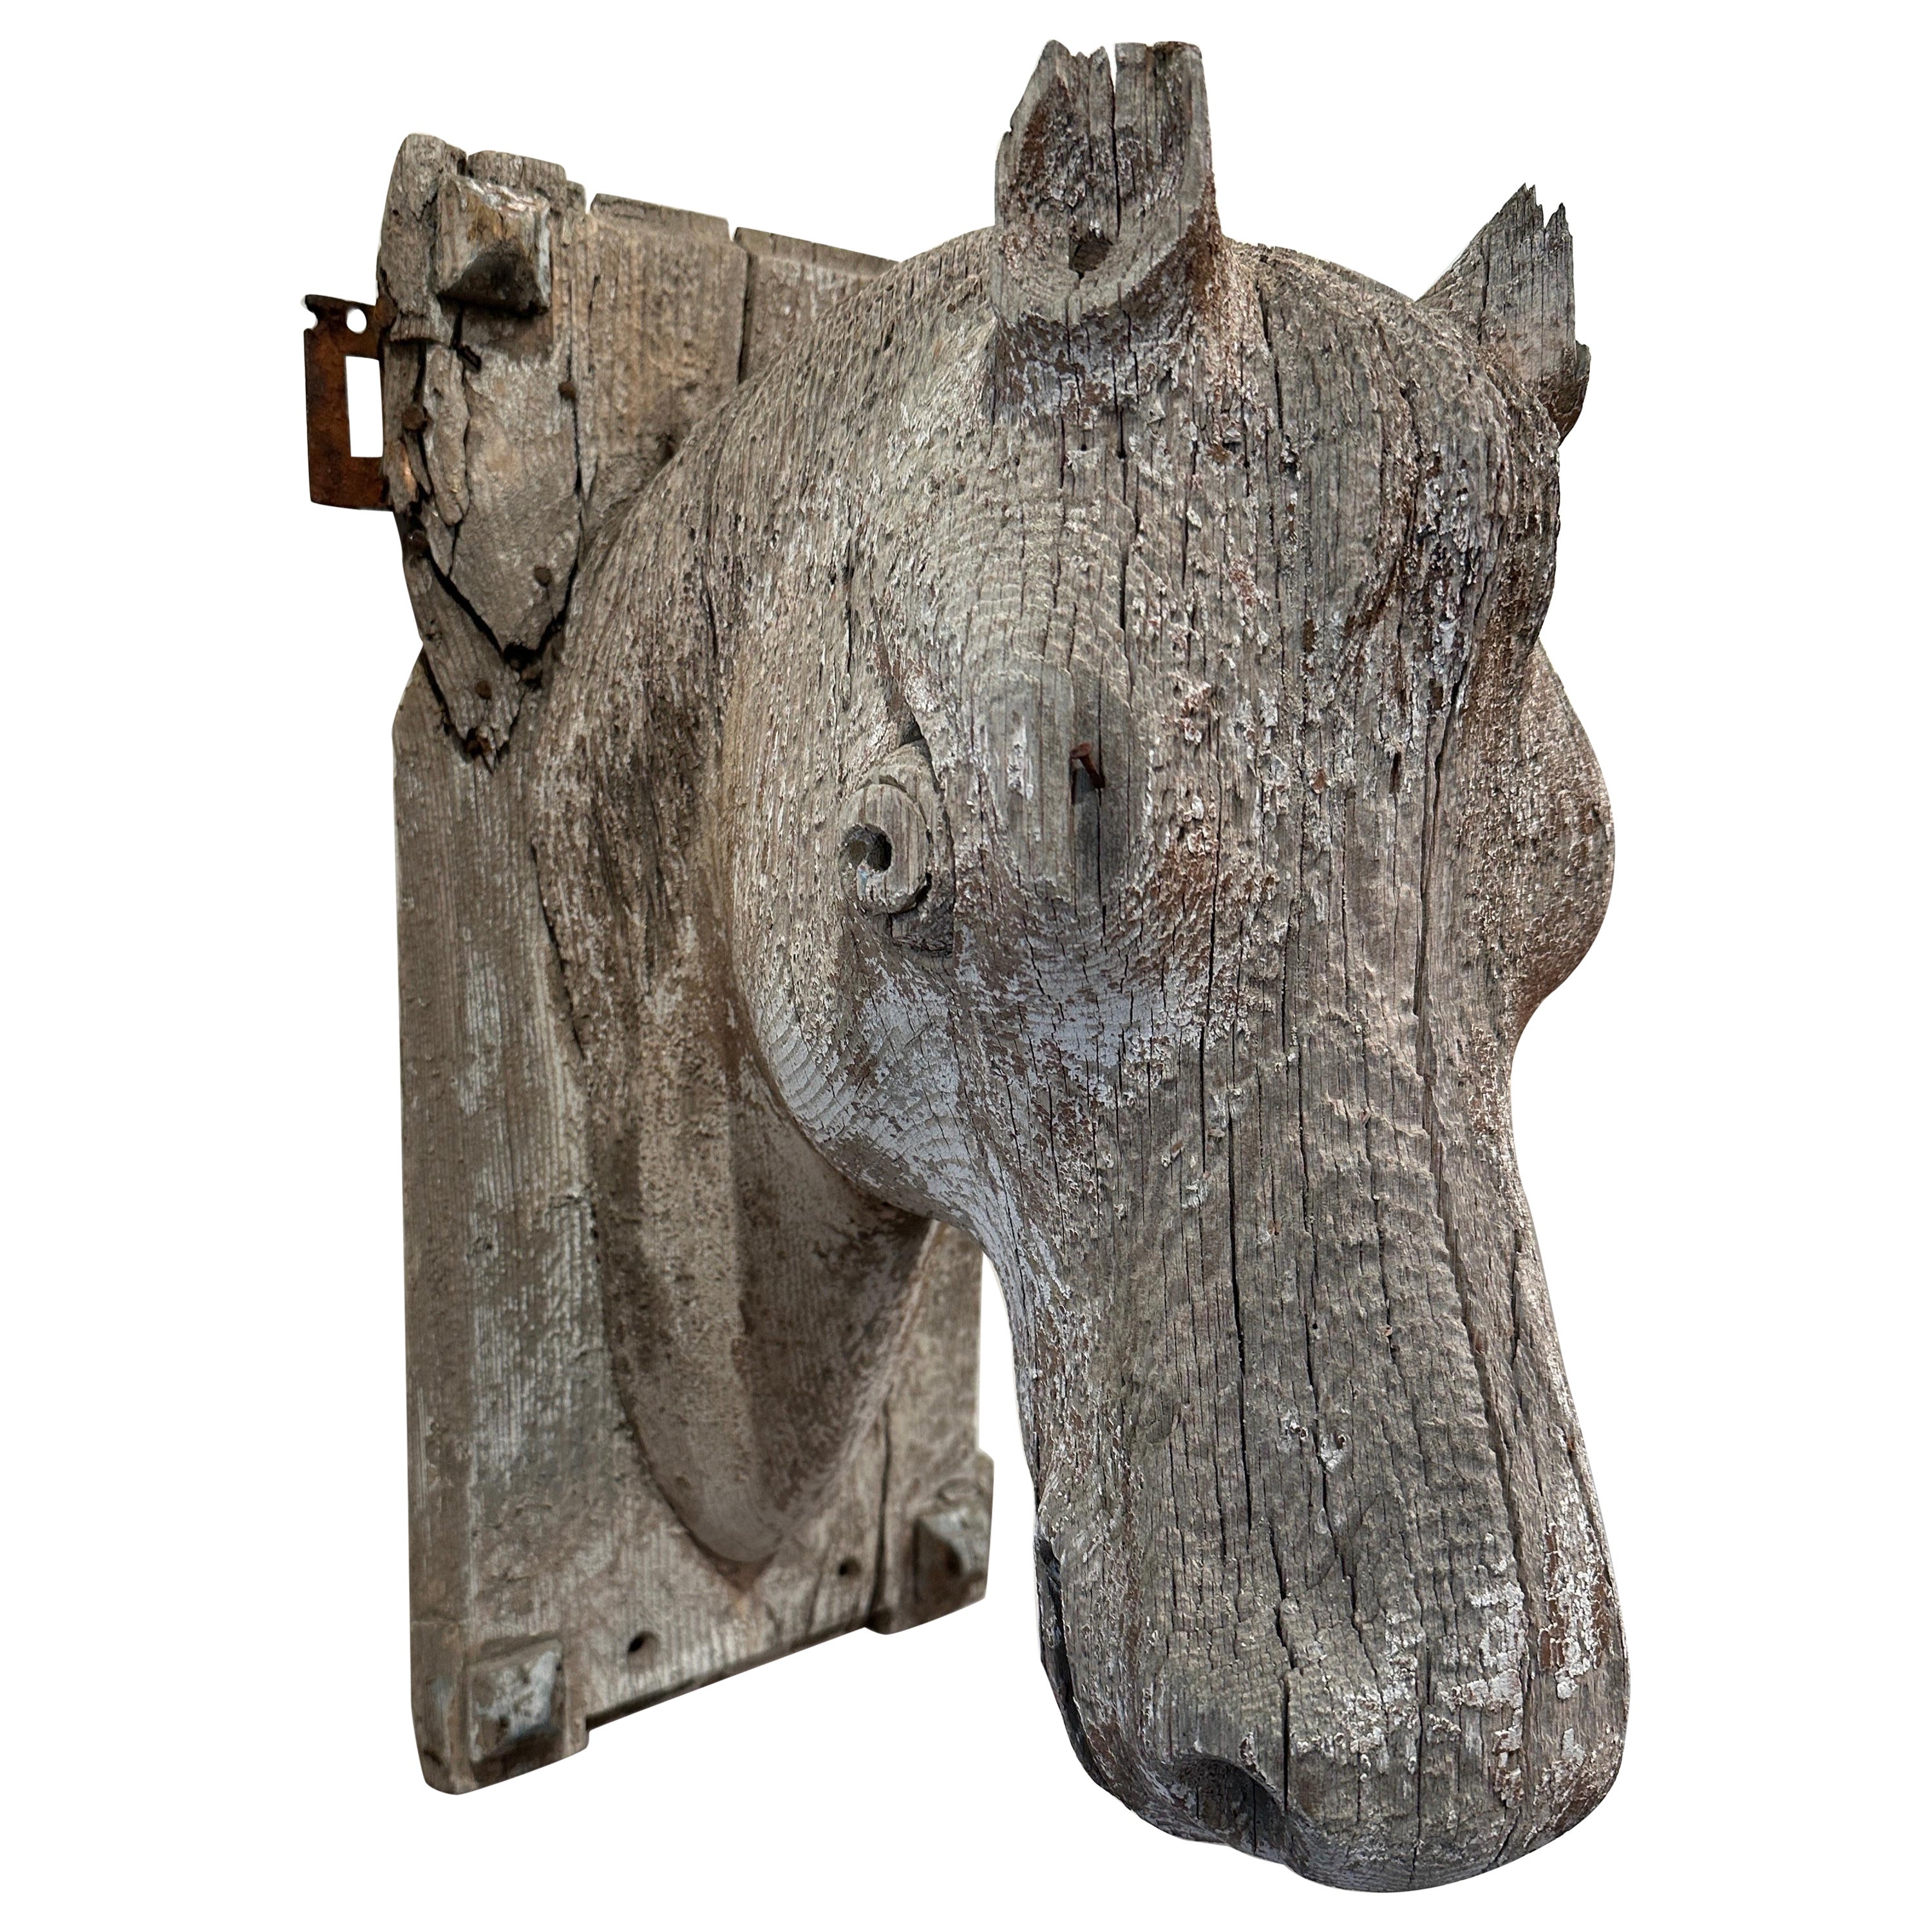 19th C. English Life-Size Carved Wood Pony Head Sculpture